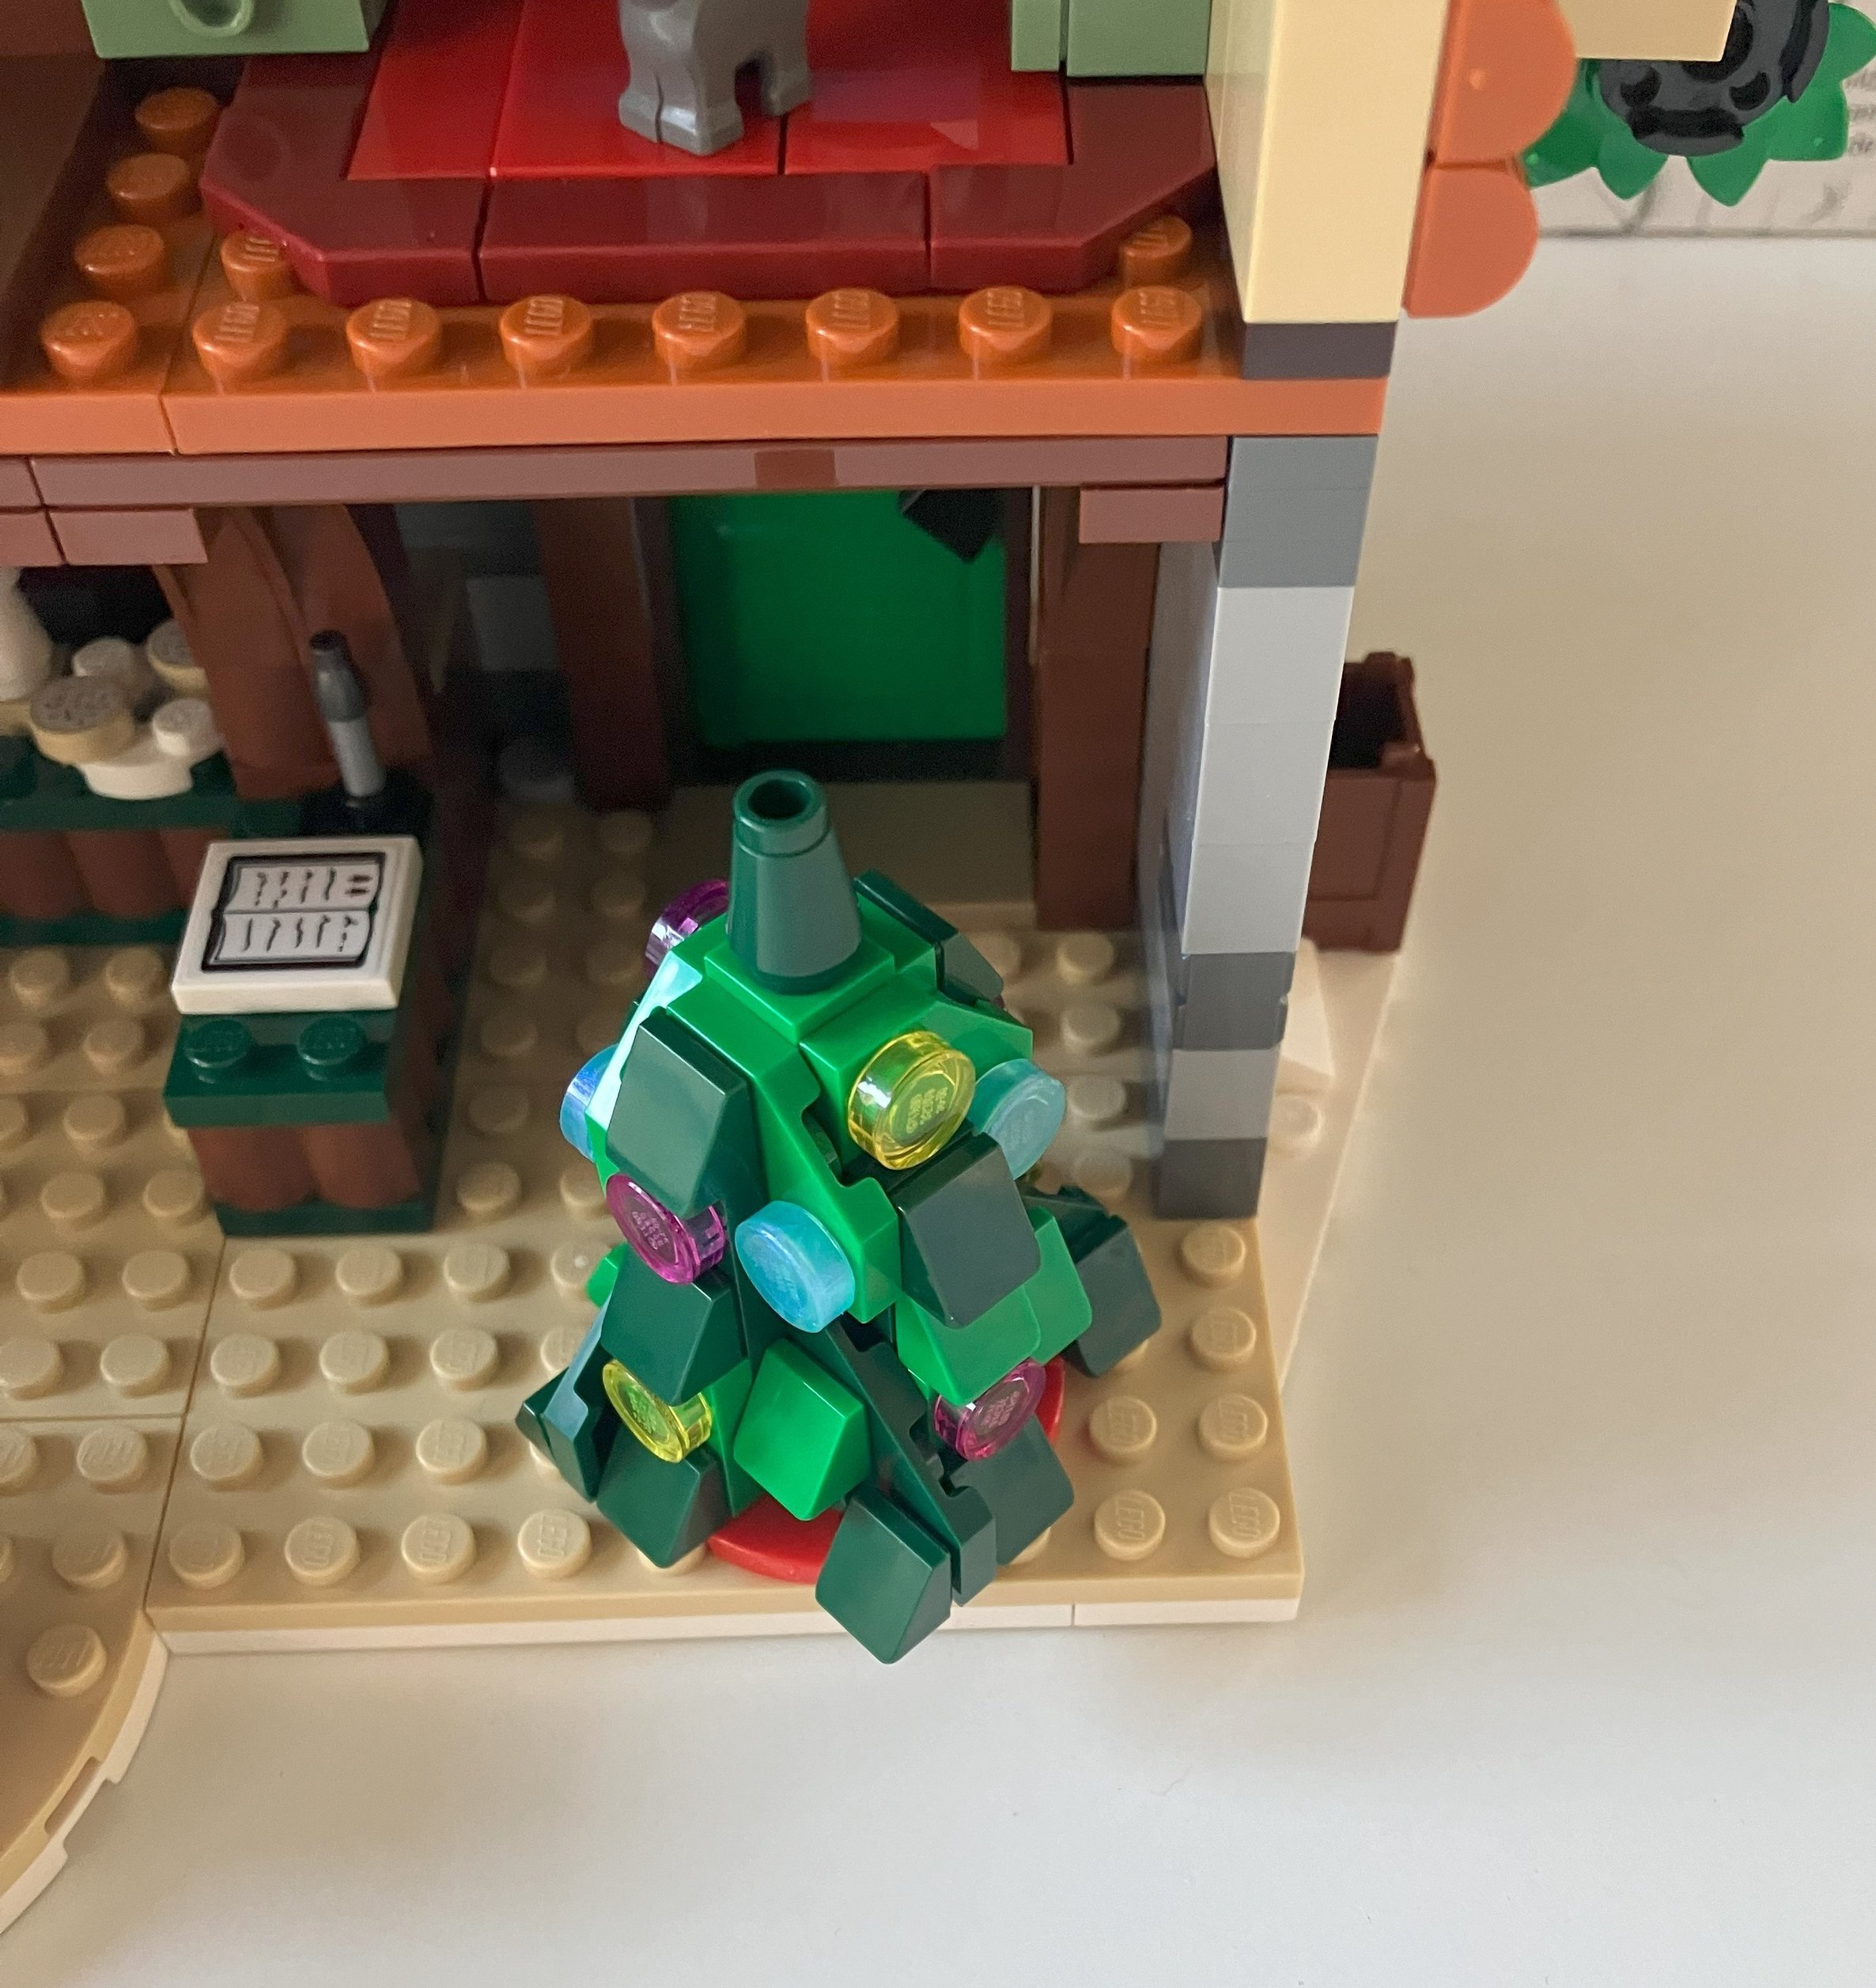 LEGO City 2024 joins the Space Race! - Jay's Brick Blog